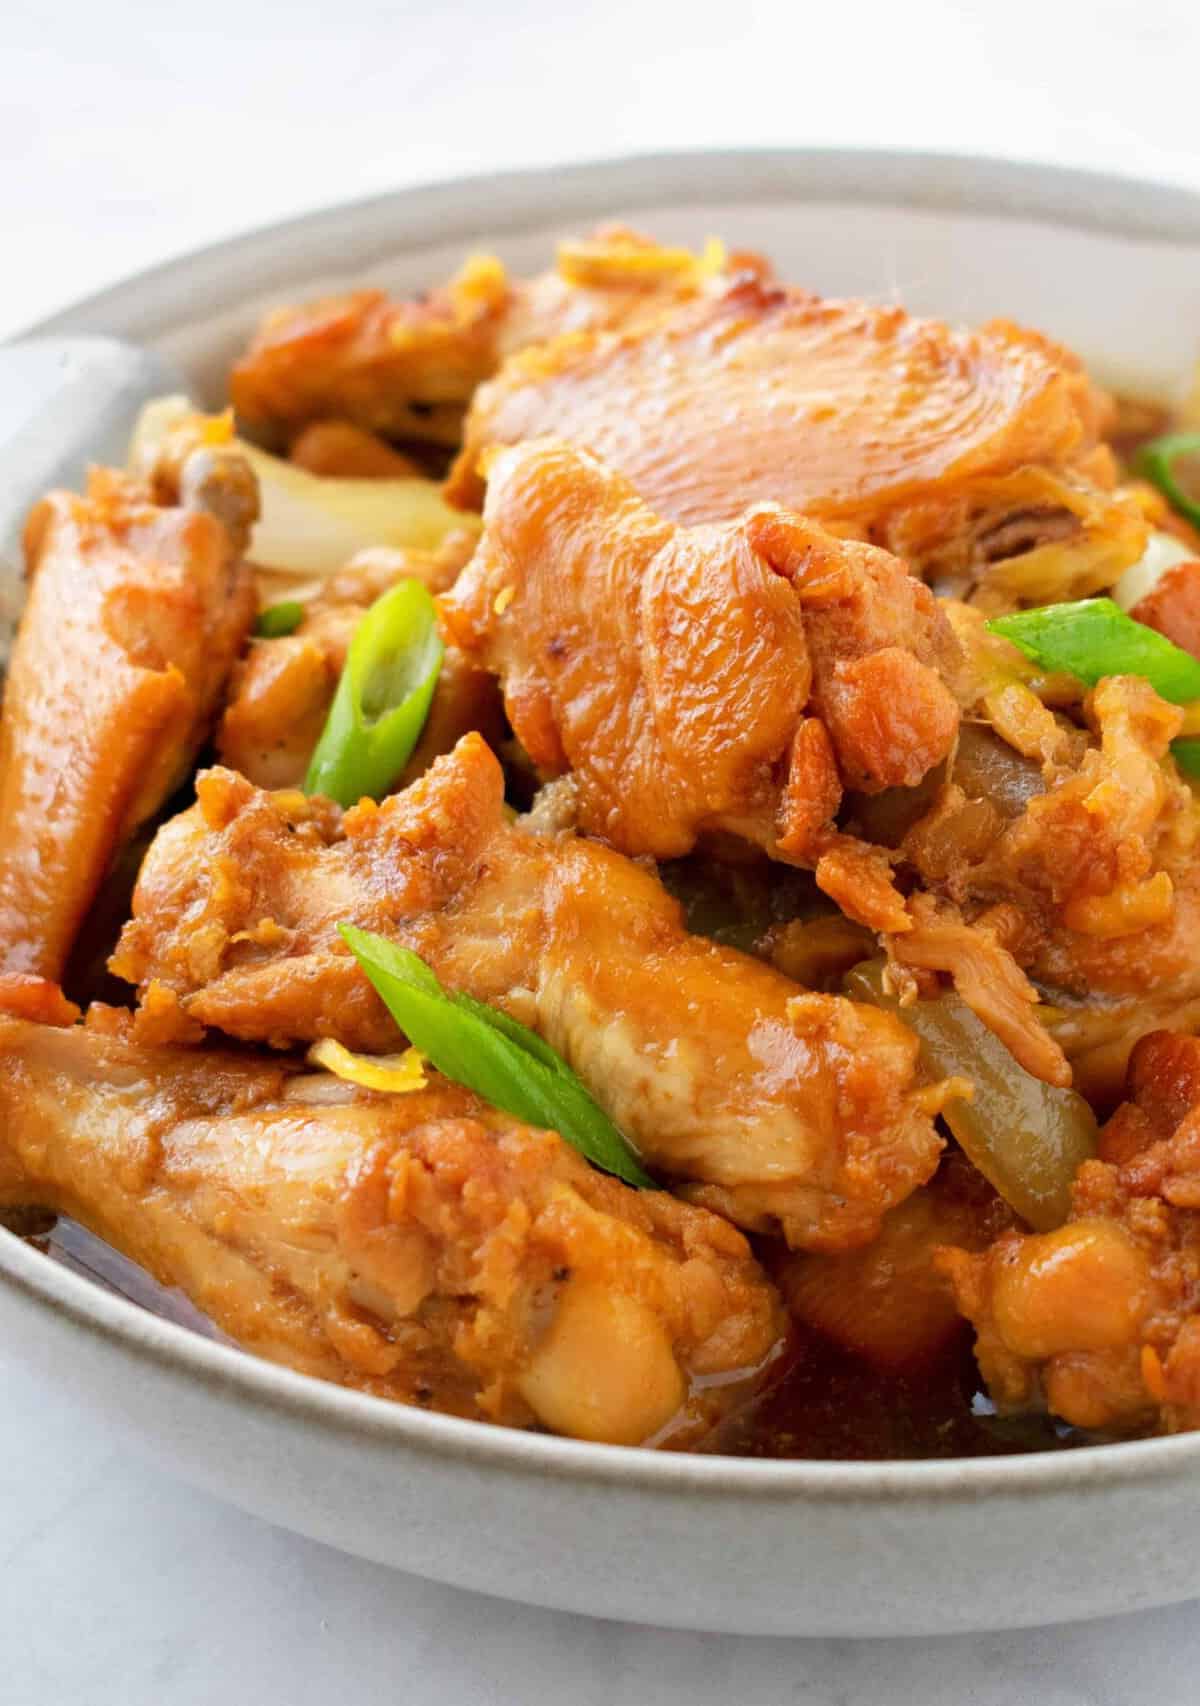  If you're a fan of ginger, this dish is a must-try for you!